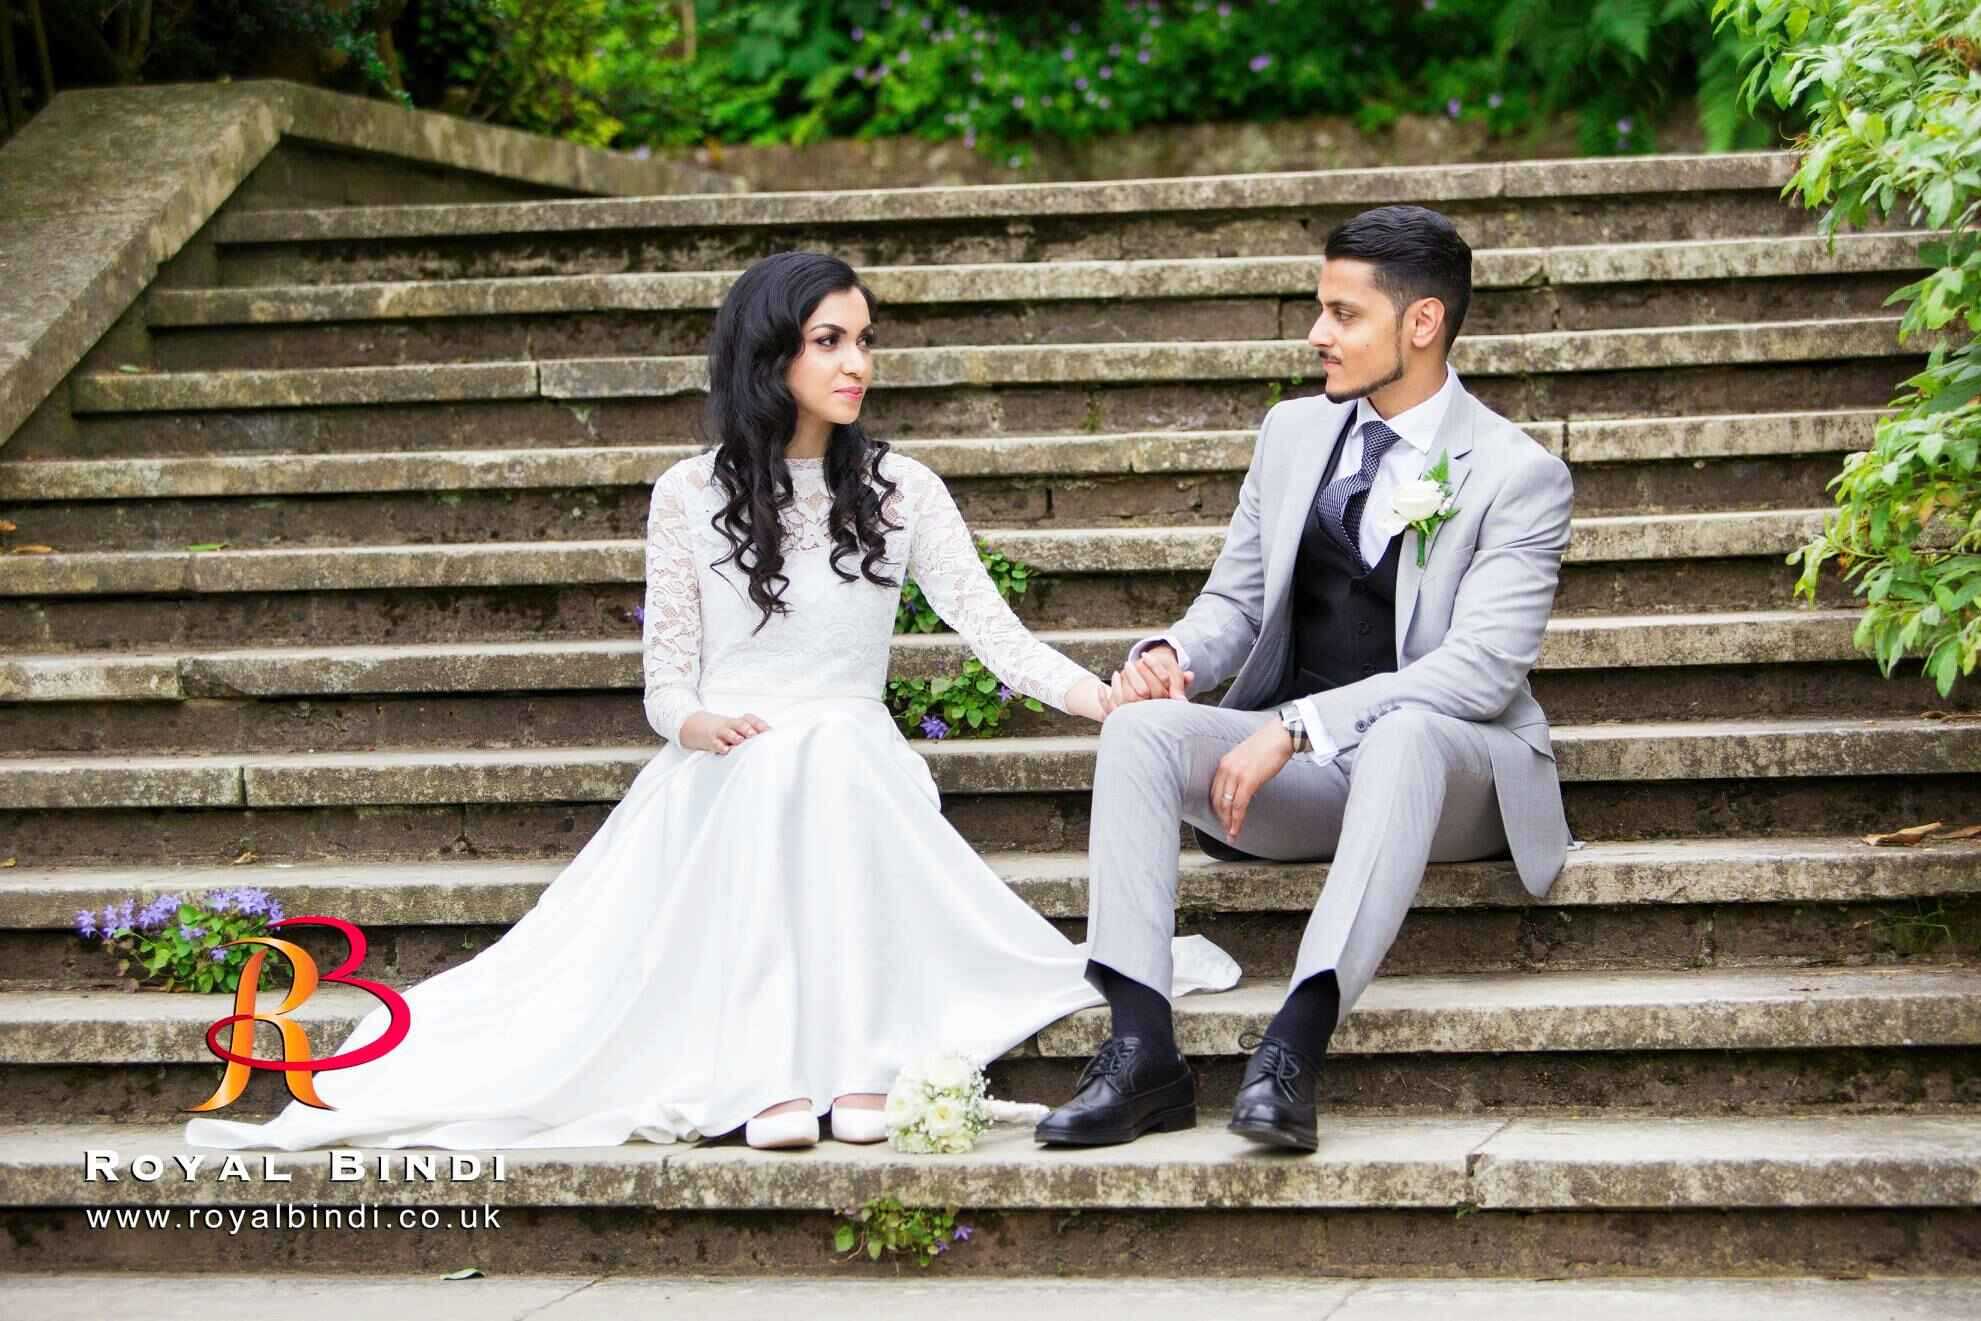 Exceptional Asian wedding photography by Royal Bindi in London.